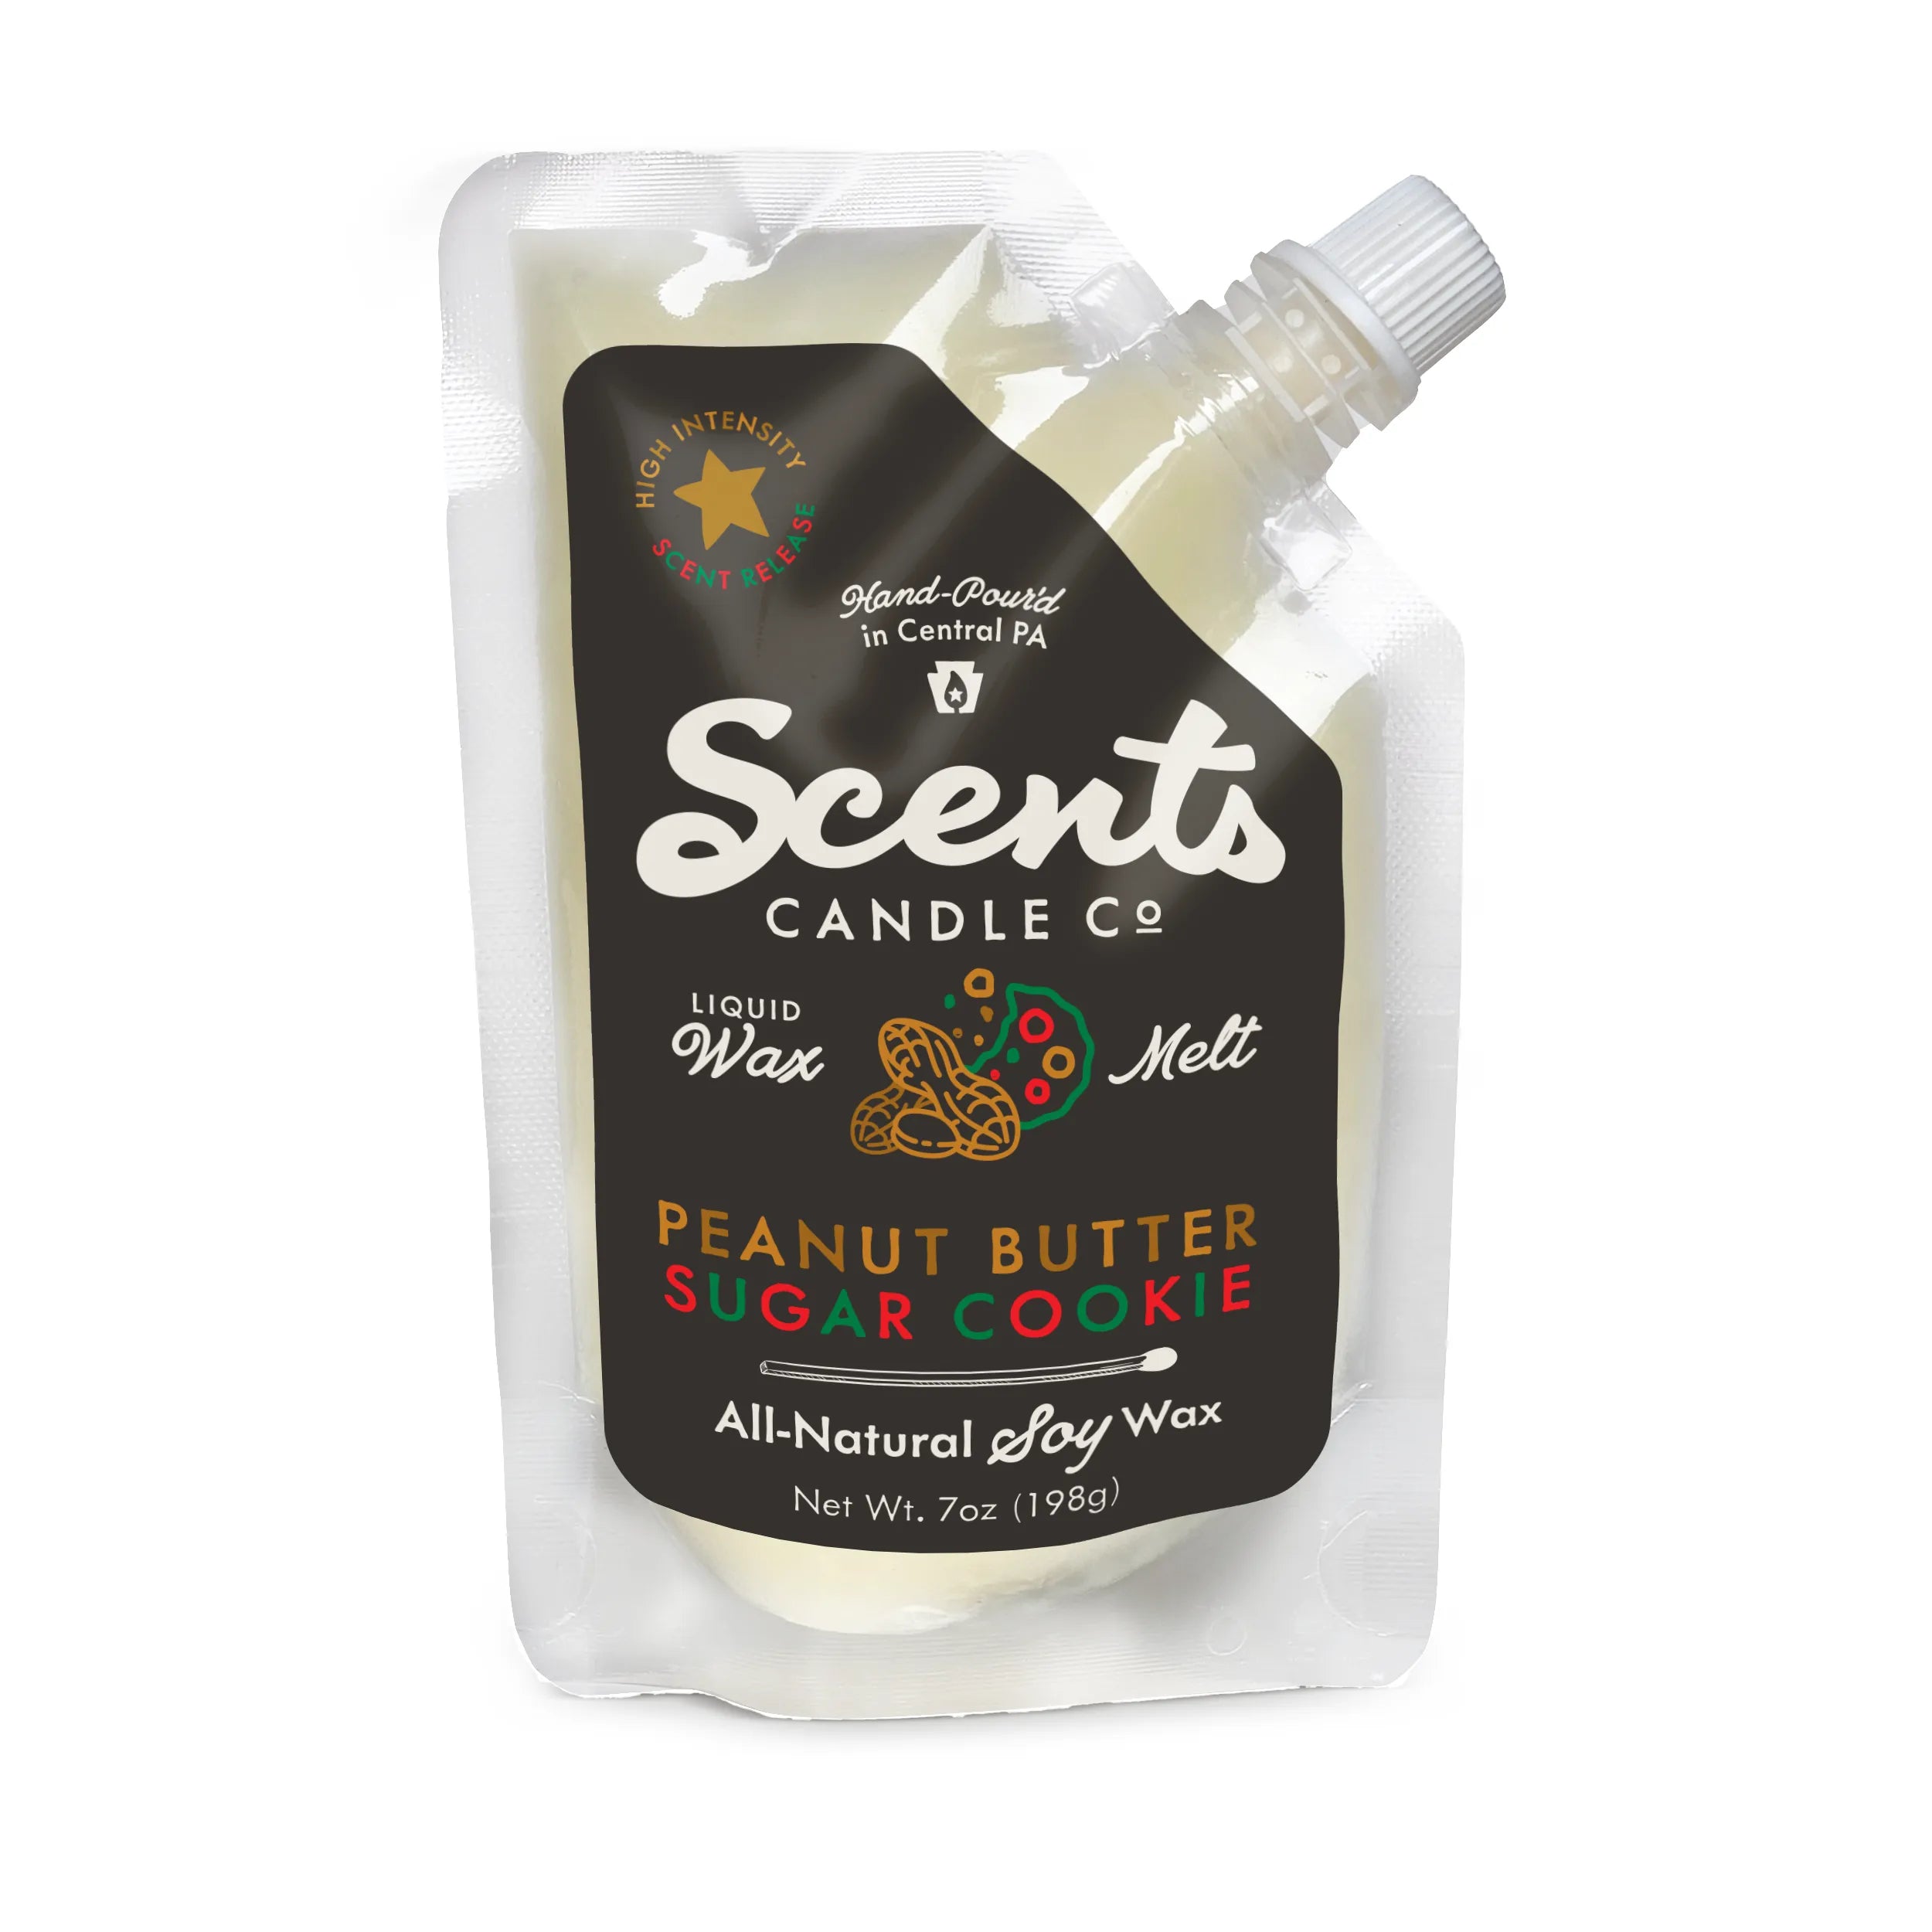 Scents Candle Co. Peanut Butter Sugar Cookie Wax Melt